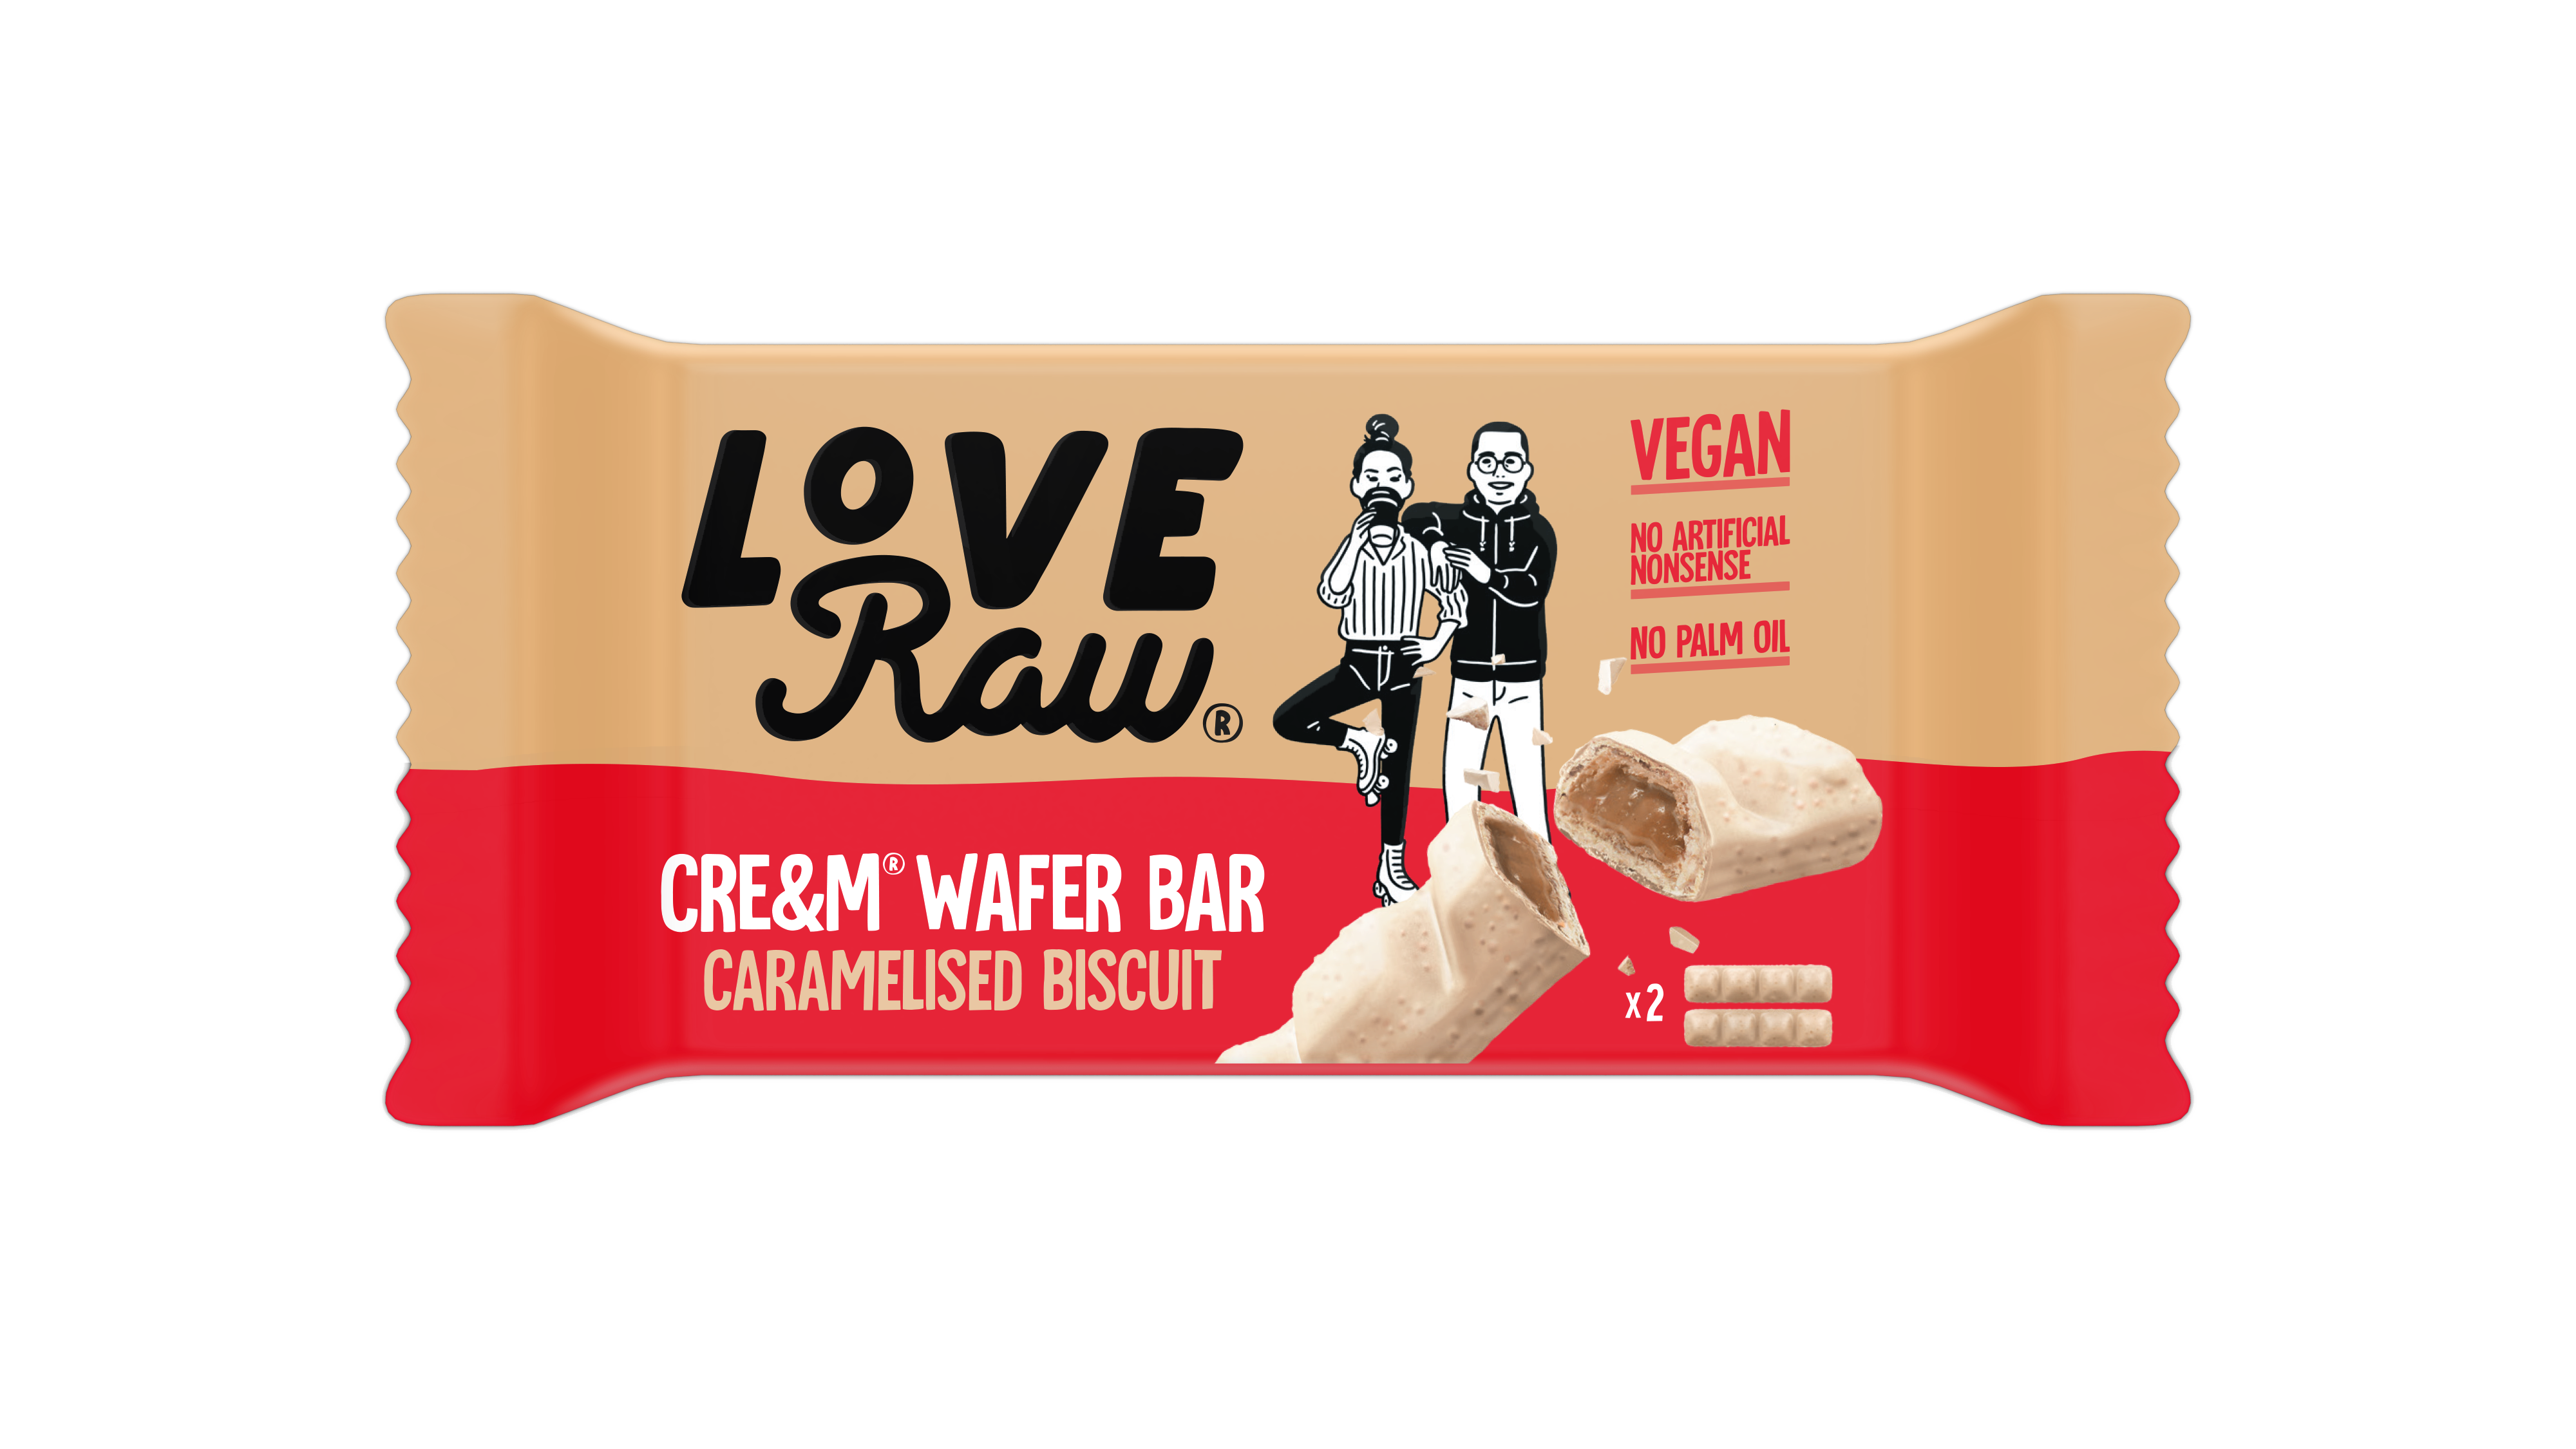 Love Raw - Caramelised Biscuit Cre&m M:lk Wafer Bar // Stores Supply // Love Raw